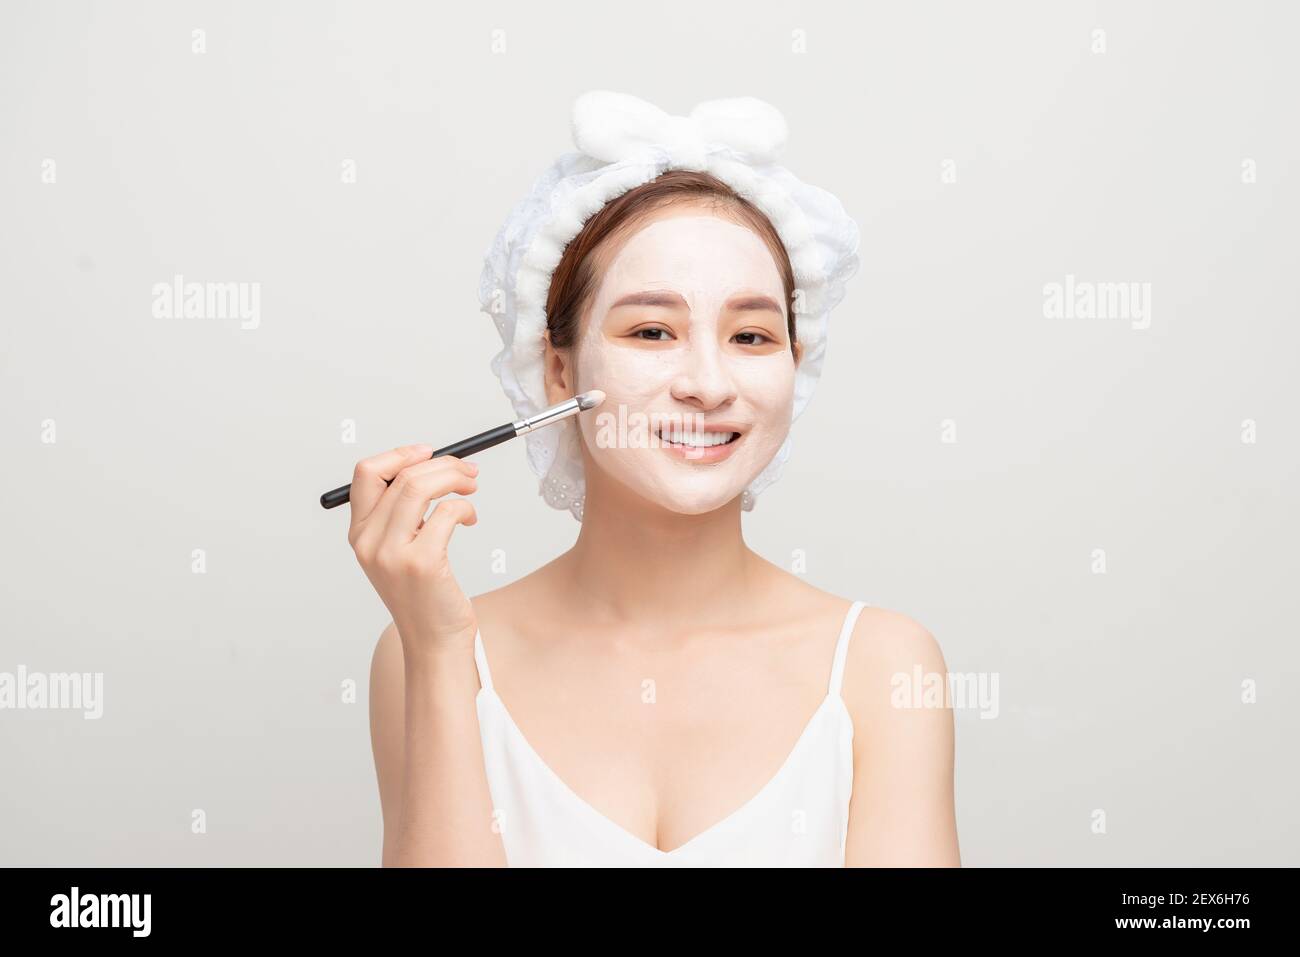 Skin care. Female applying black purifying mud mask, cosmetic healing clay to half face, using brush. Beauty and wellness. Spa and acne treatment. Stock Photo